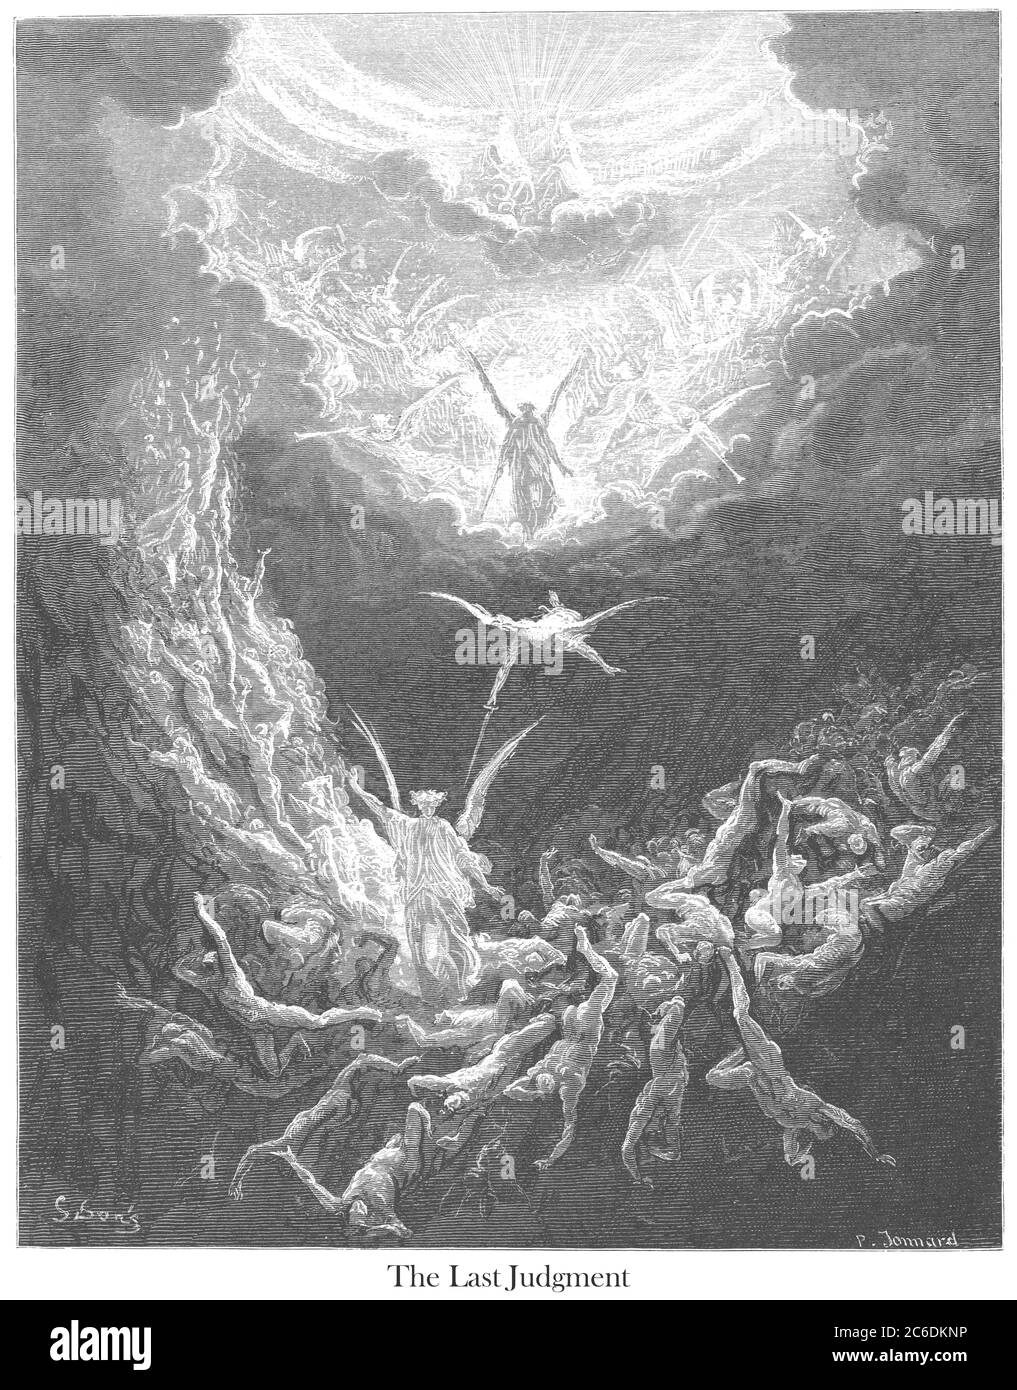 The Last Judgment [Revelation 20:12] From the book 'Bible Gallery' Illustrated by Gustave Dore with Memoir of Dore and Descriptive Letter-press by Talbot W. Chambers D.D. Published by Cassell & Company Limited in London and simultaneously by Mame in Tours, France in 1866 Stock Photo